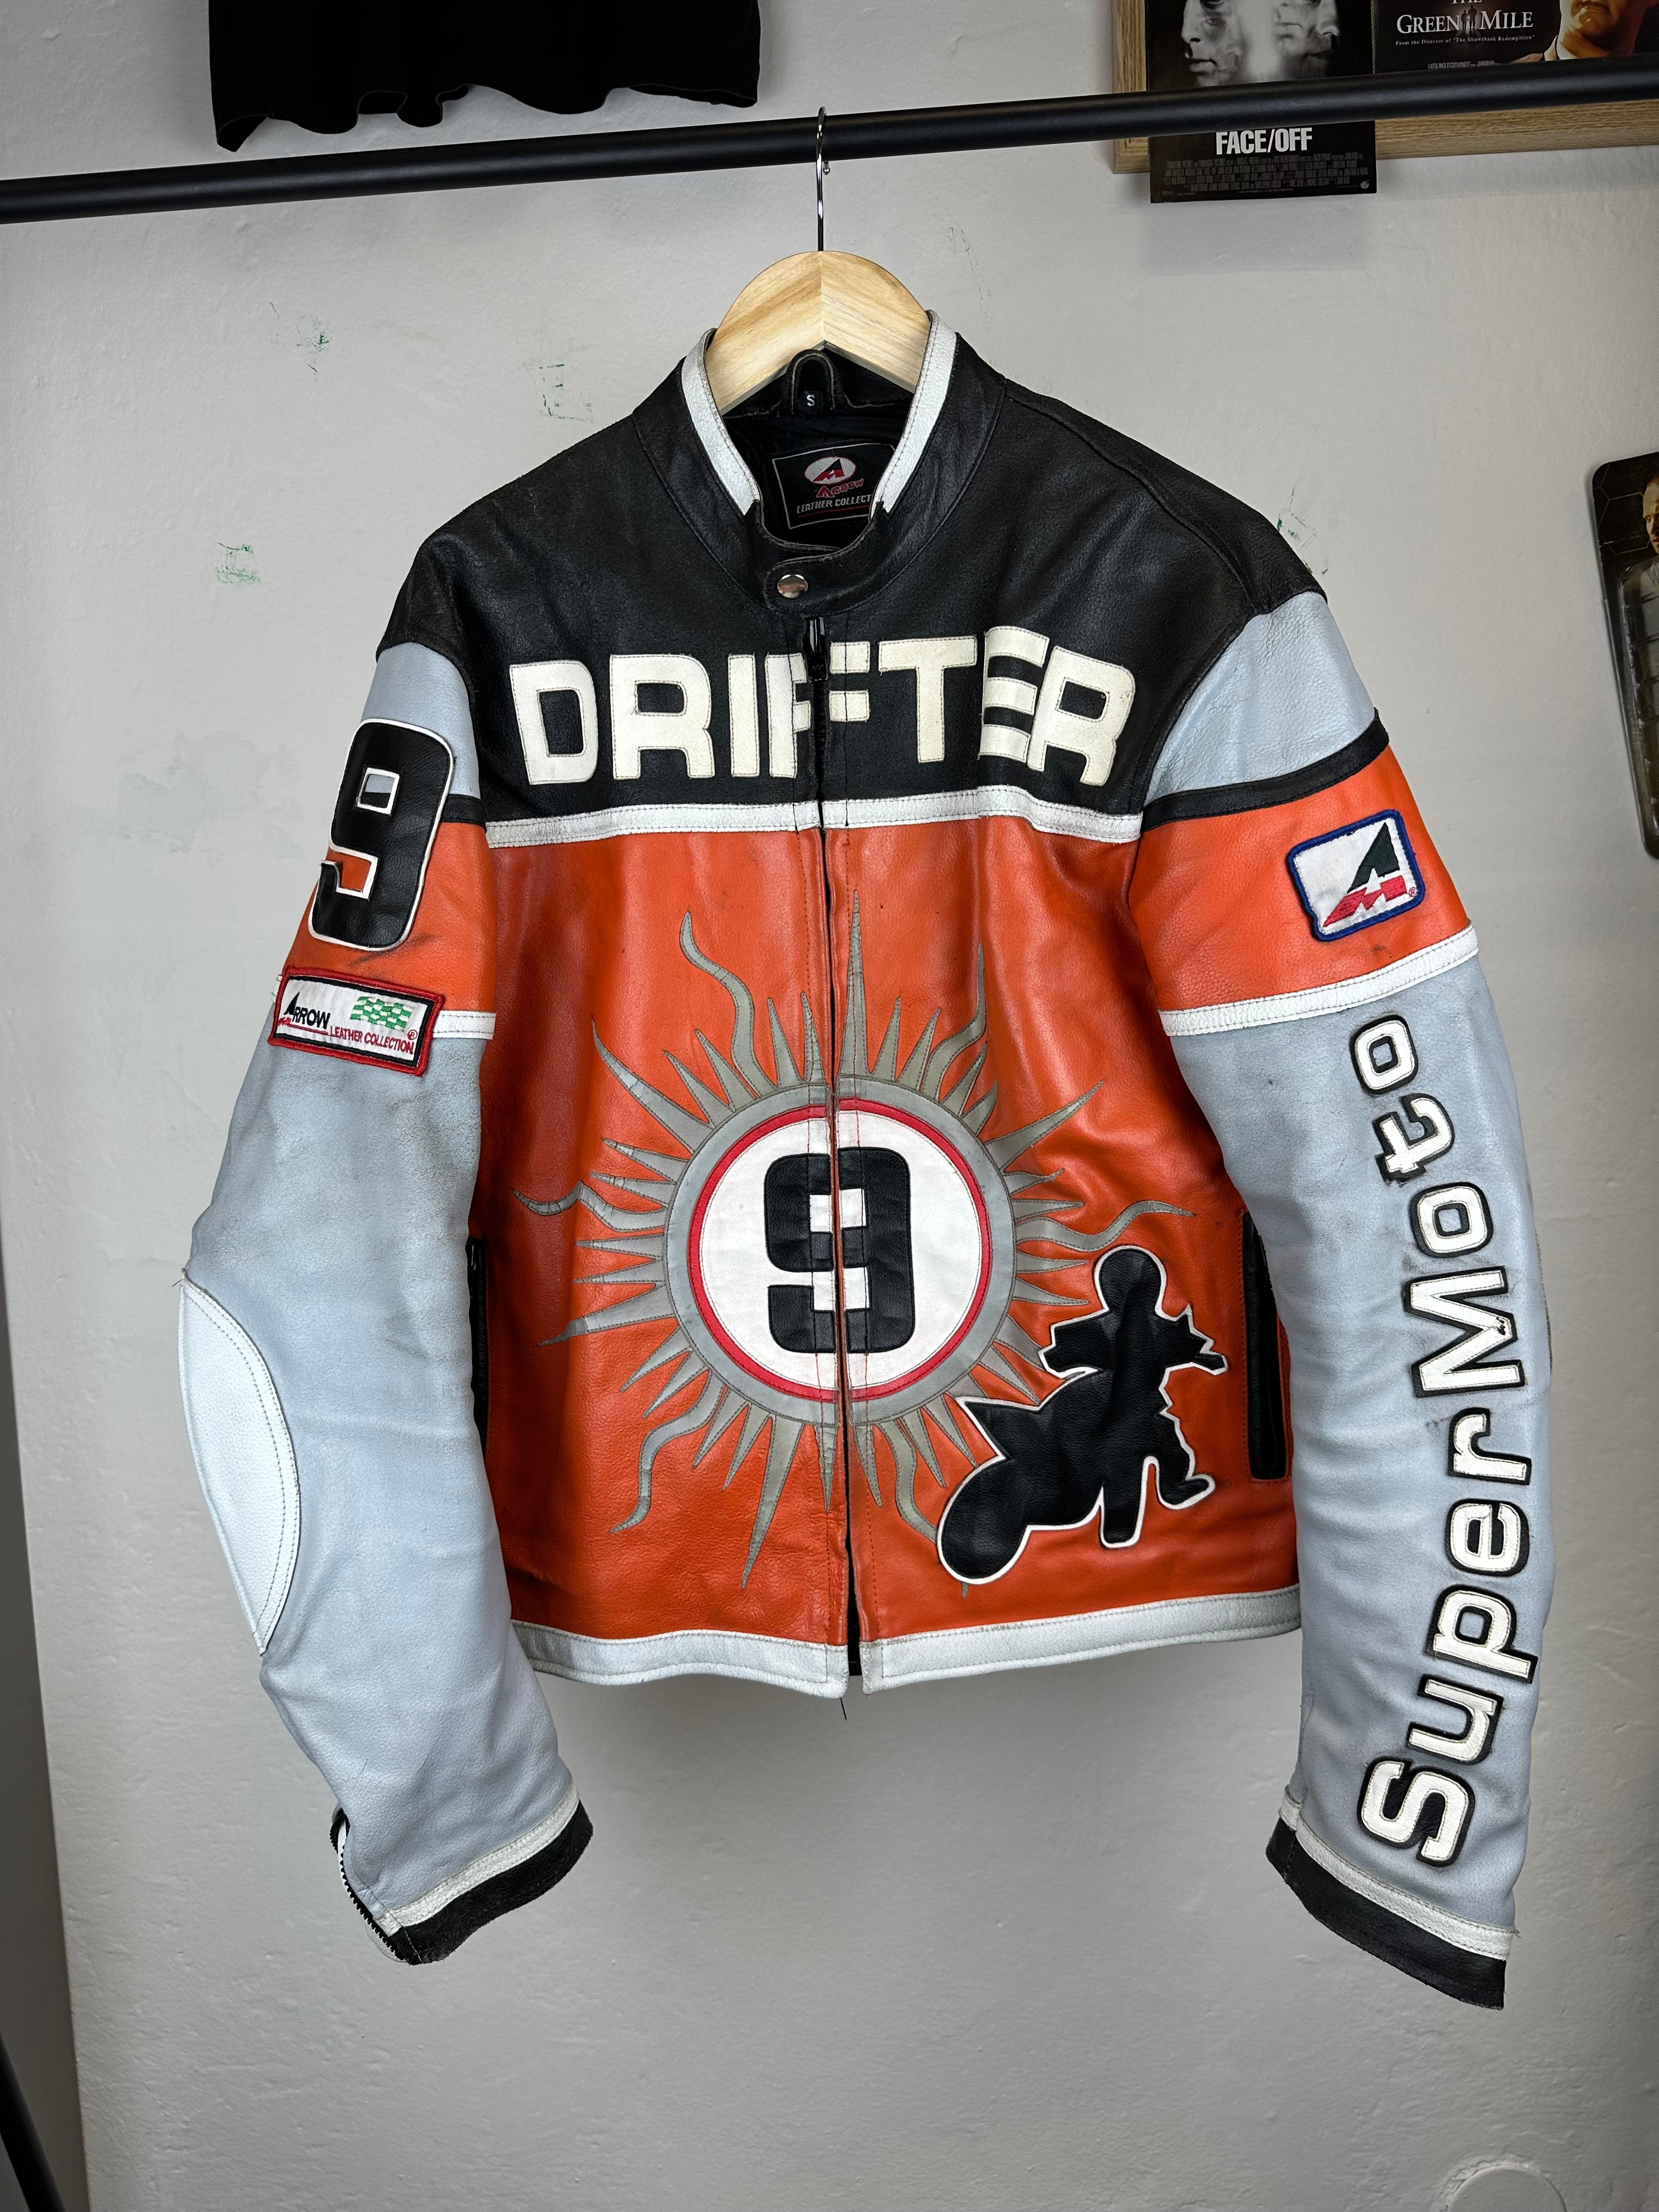 Vintage Drifter Motorcycle Leather Jacket - size M